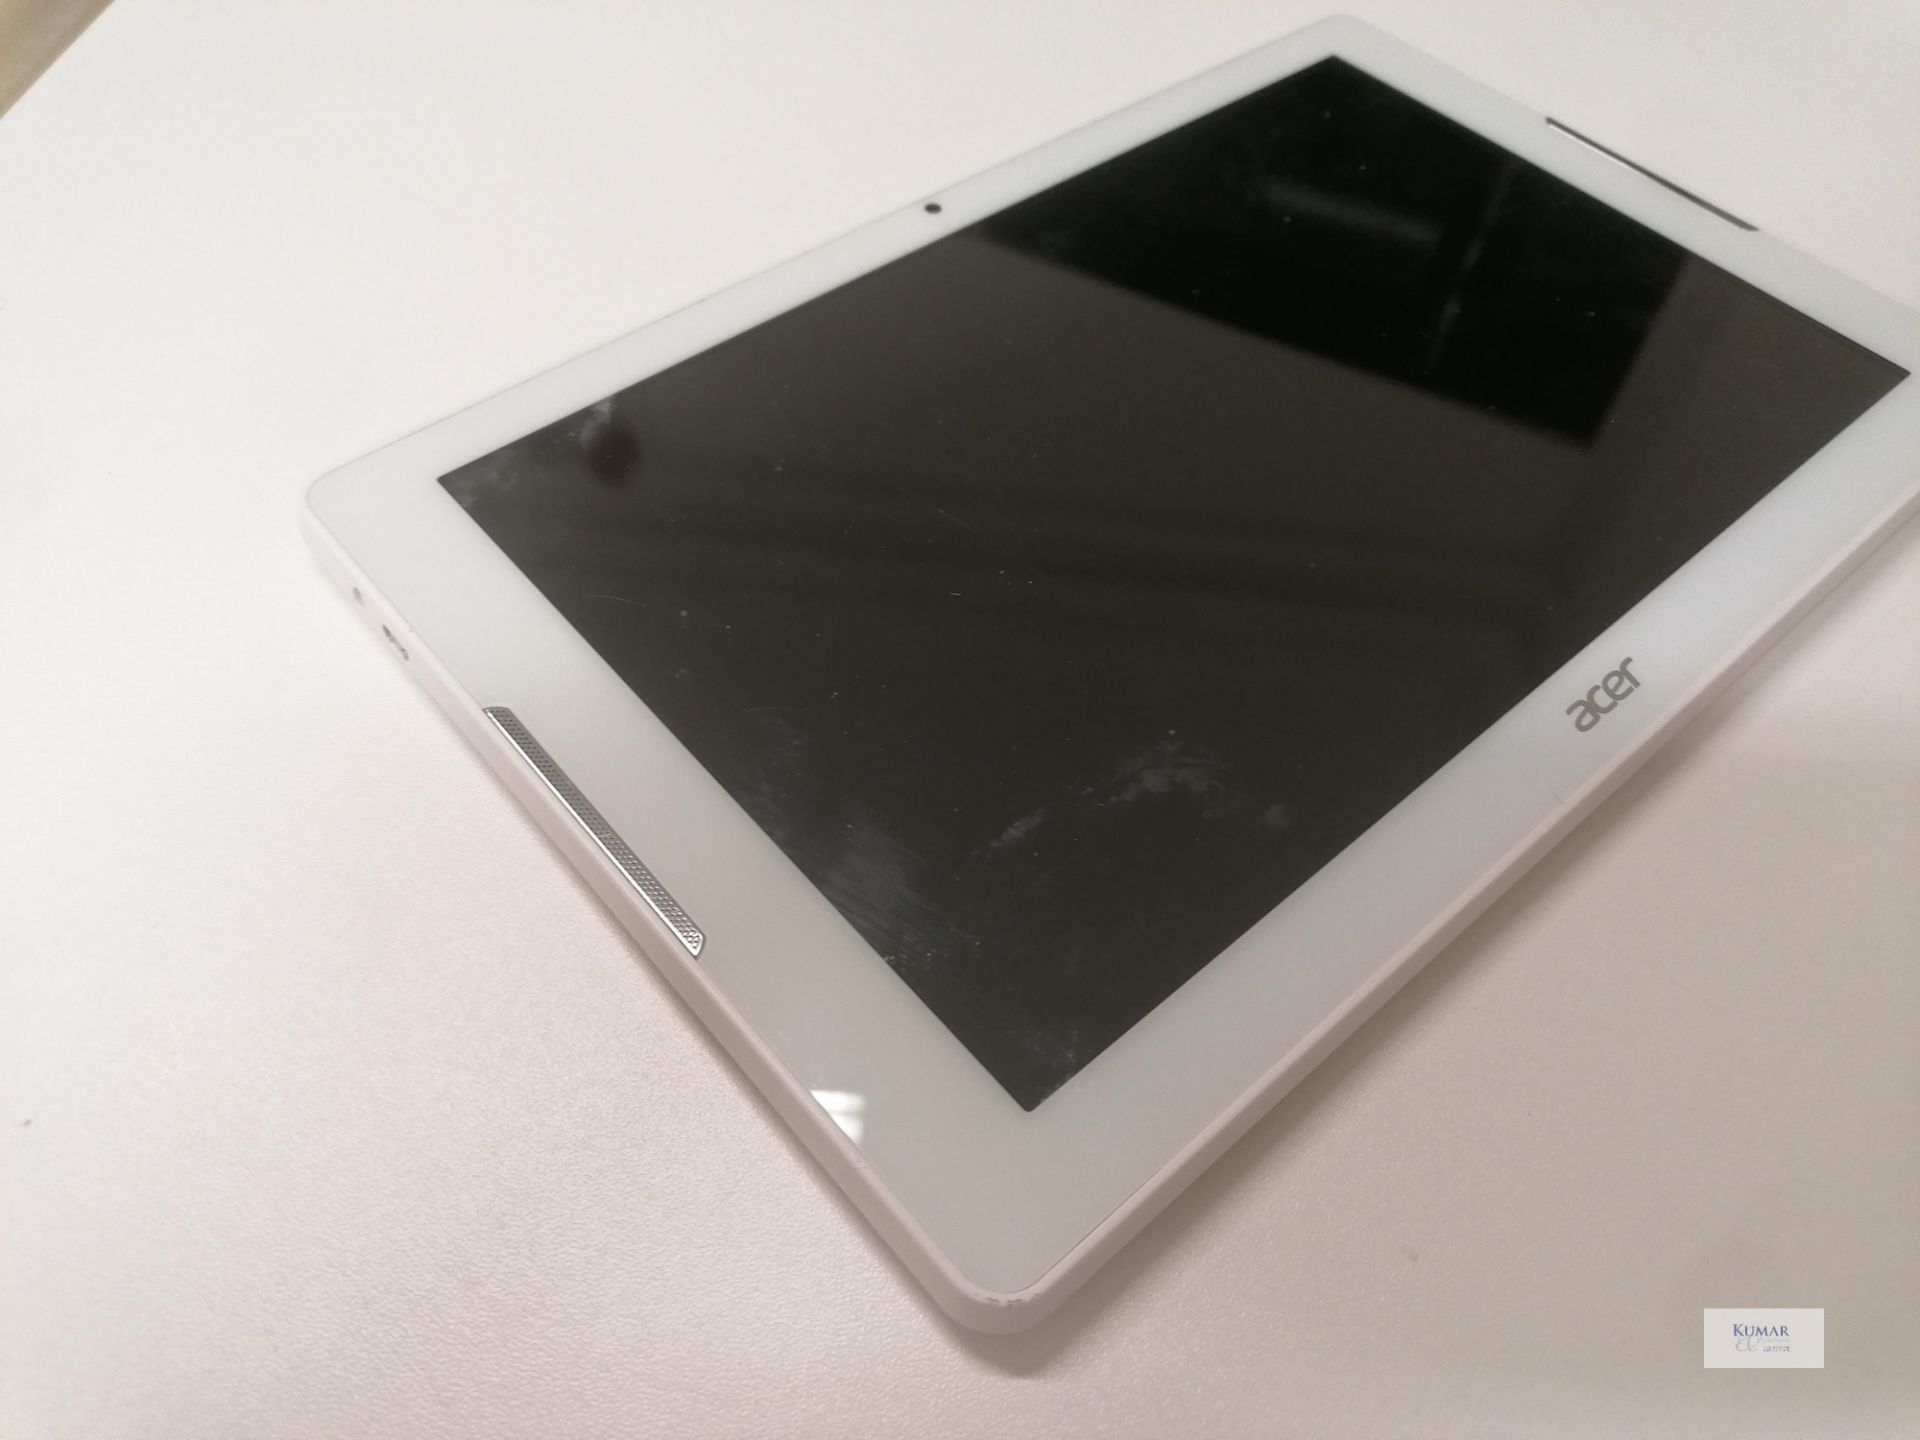 Acer Iconia One 10 B3-A30 Model A5003 Tablet Man 02 2017 Updated 05 02 2019 - Image 2 of 5